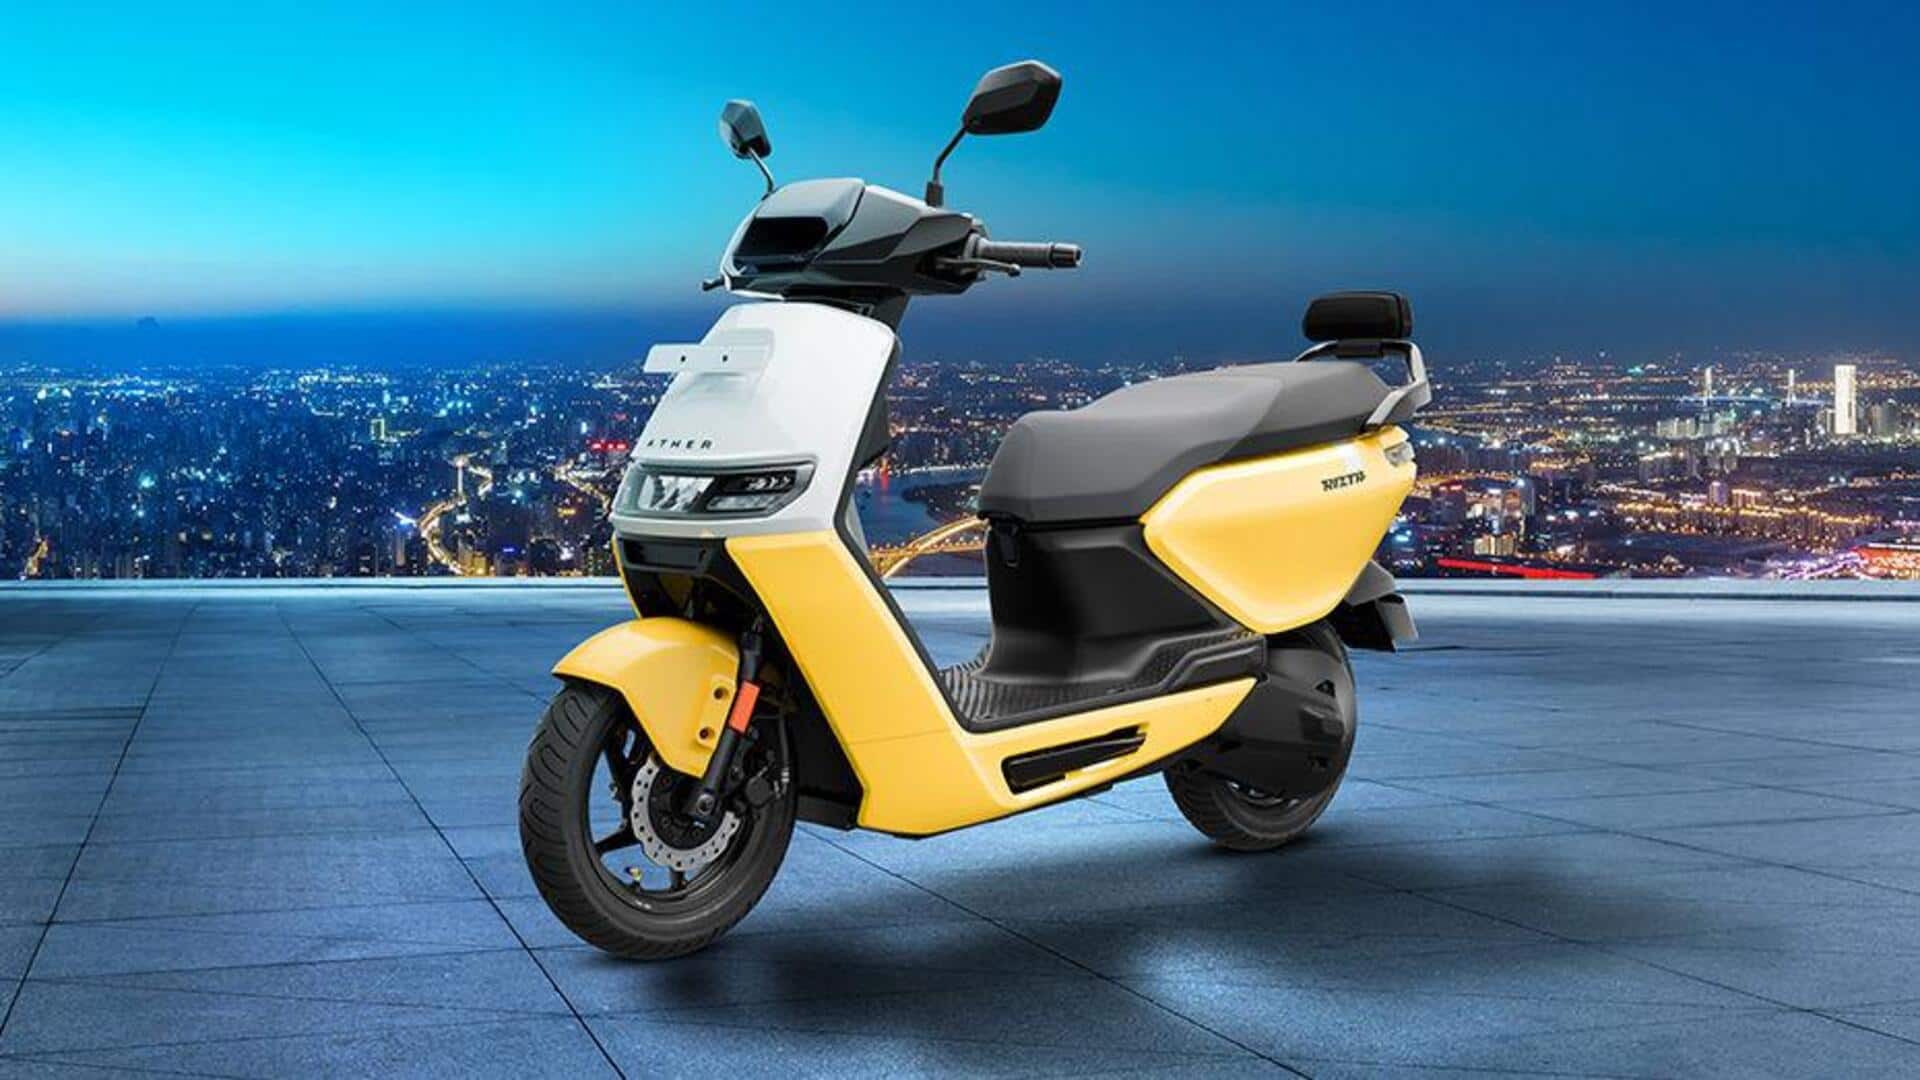 Ather Rizta e-scooter production starts, deliveries to commence soon